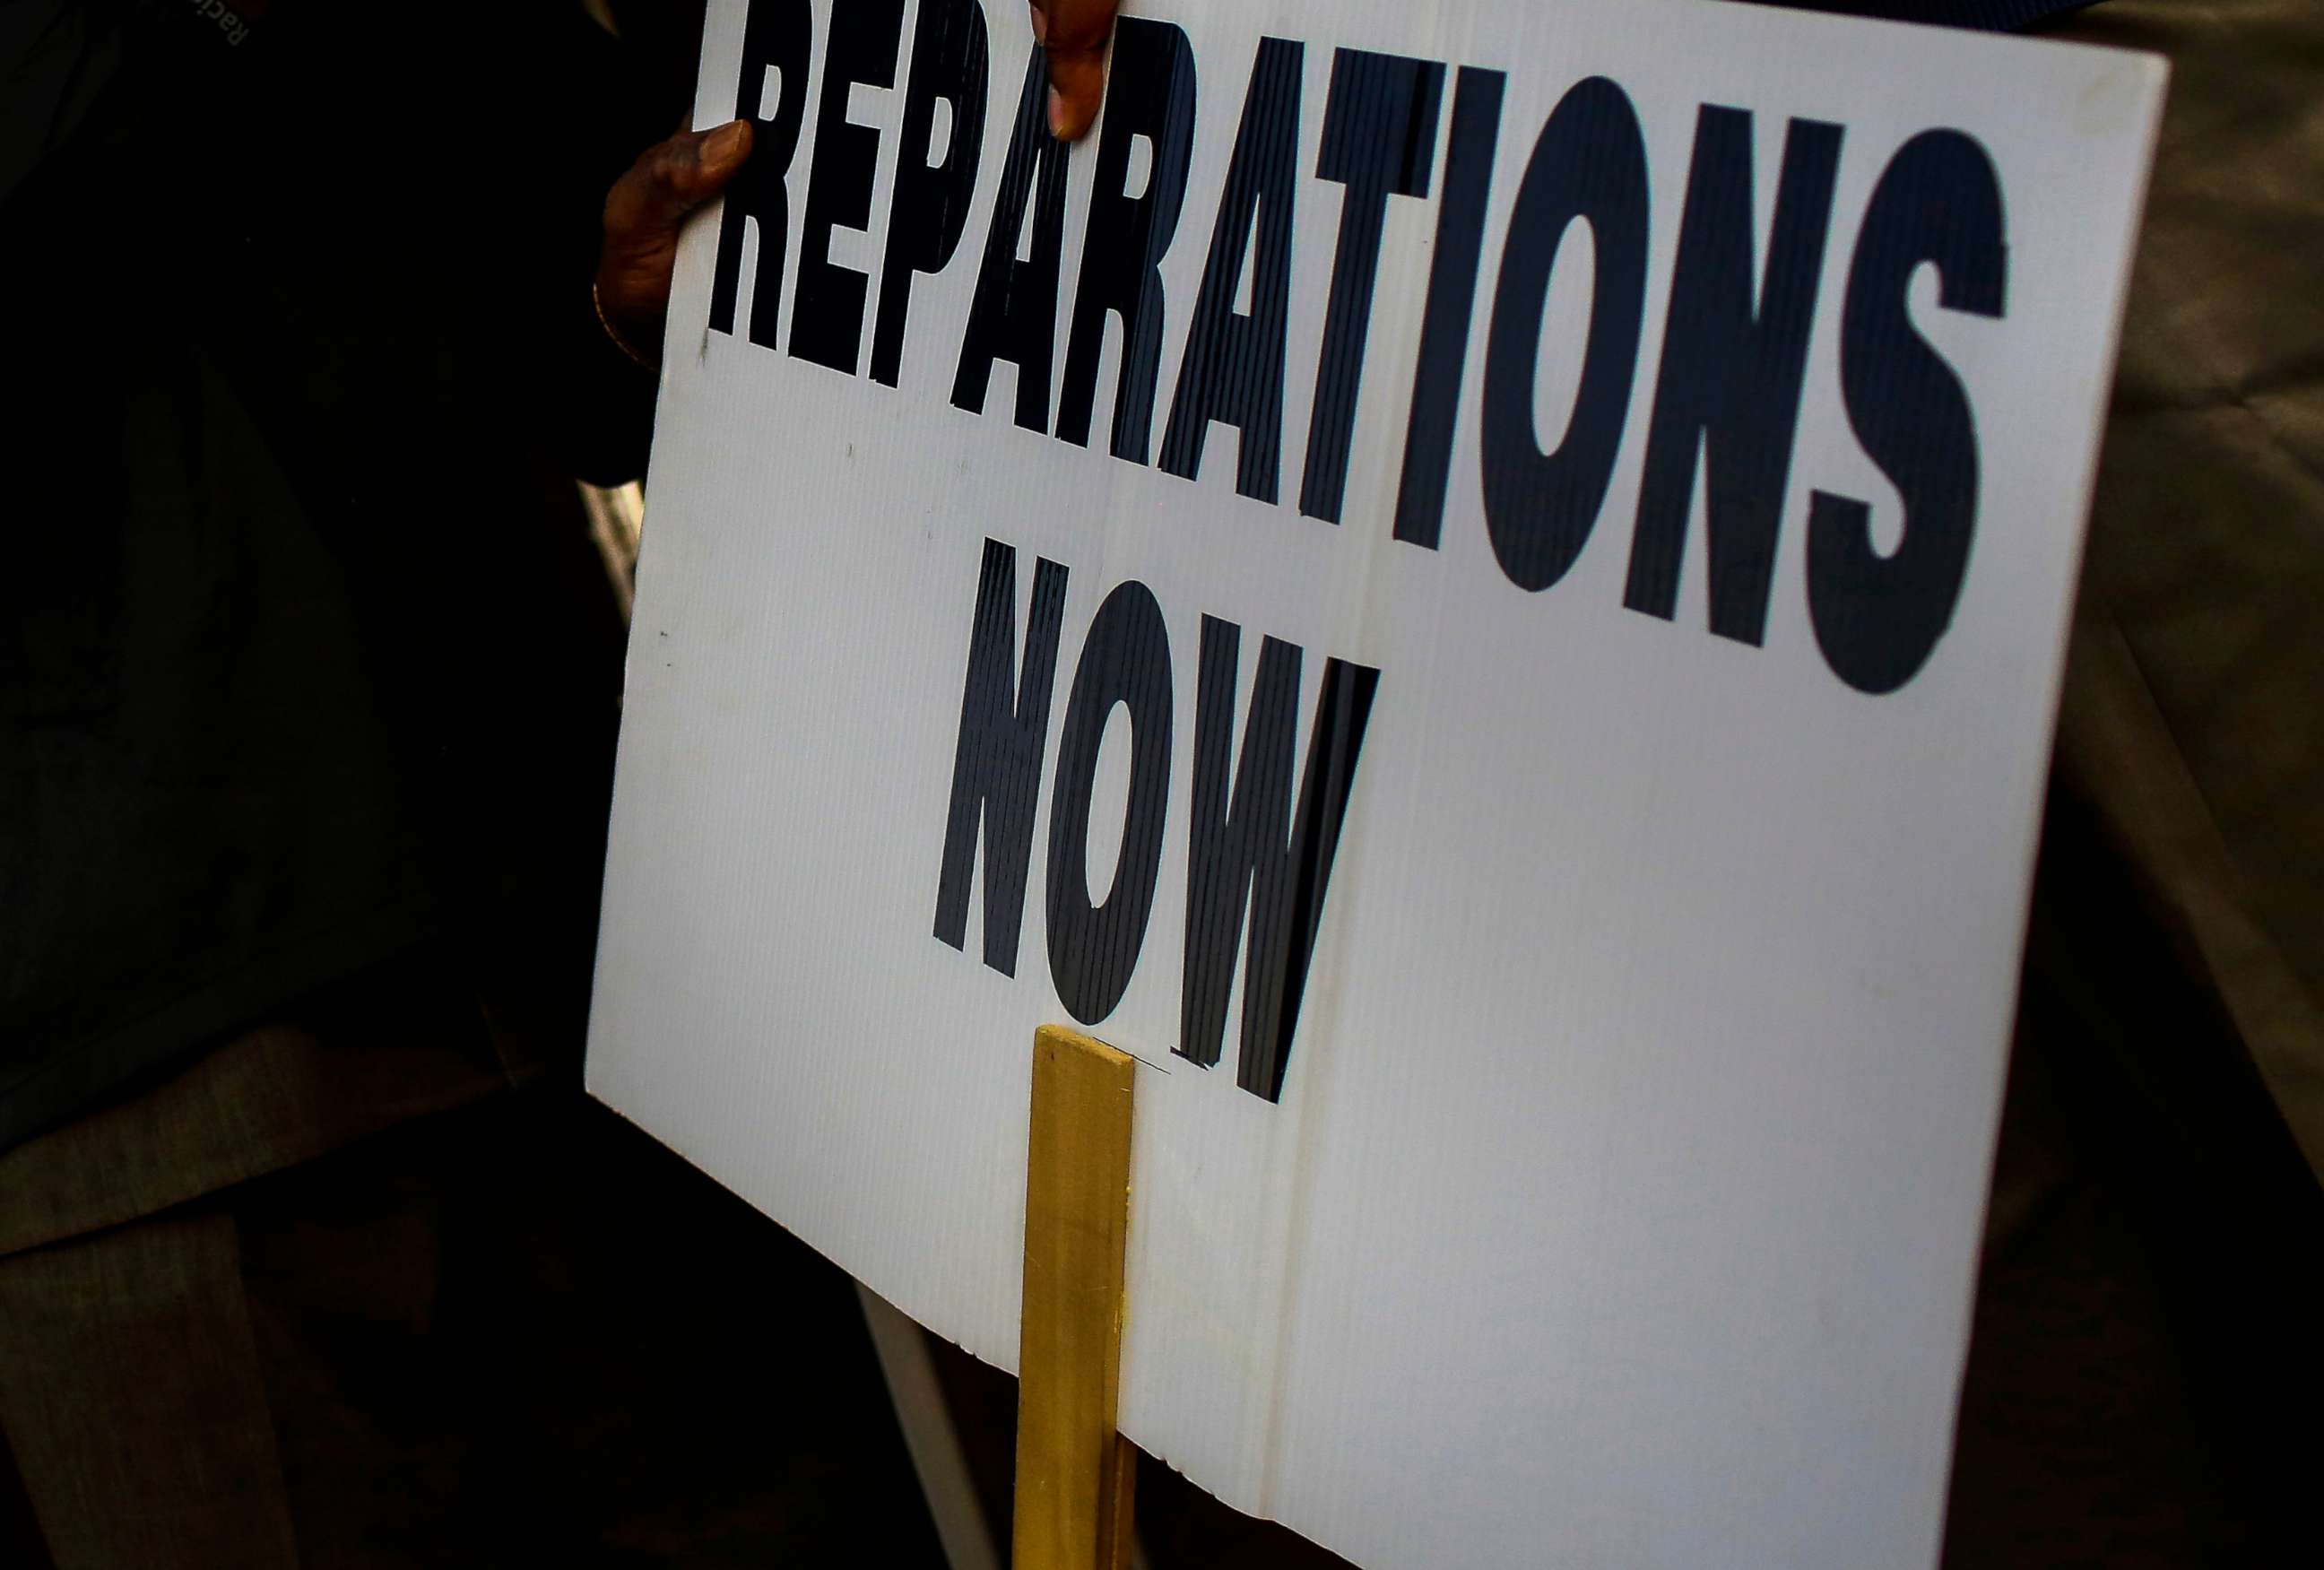 PHOTO: A reparations now sign is seen at a protest on Nov. 18, 2020, in Tulsa, Oklahoma.